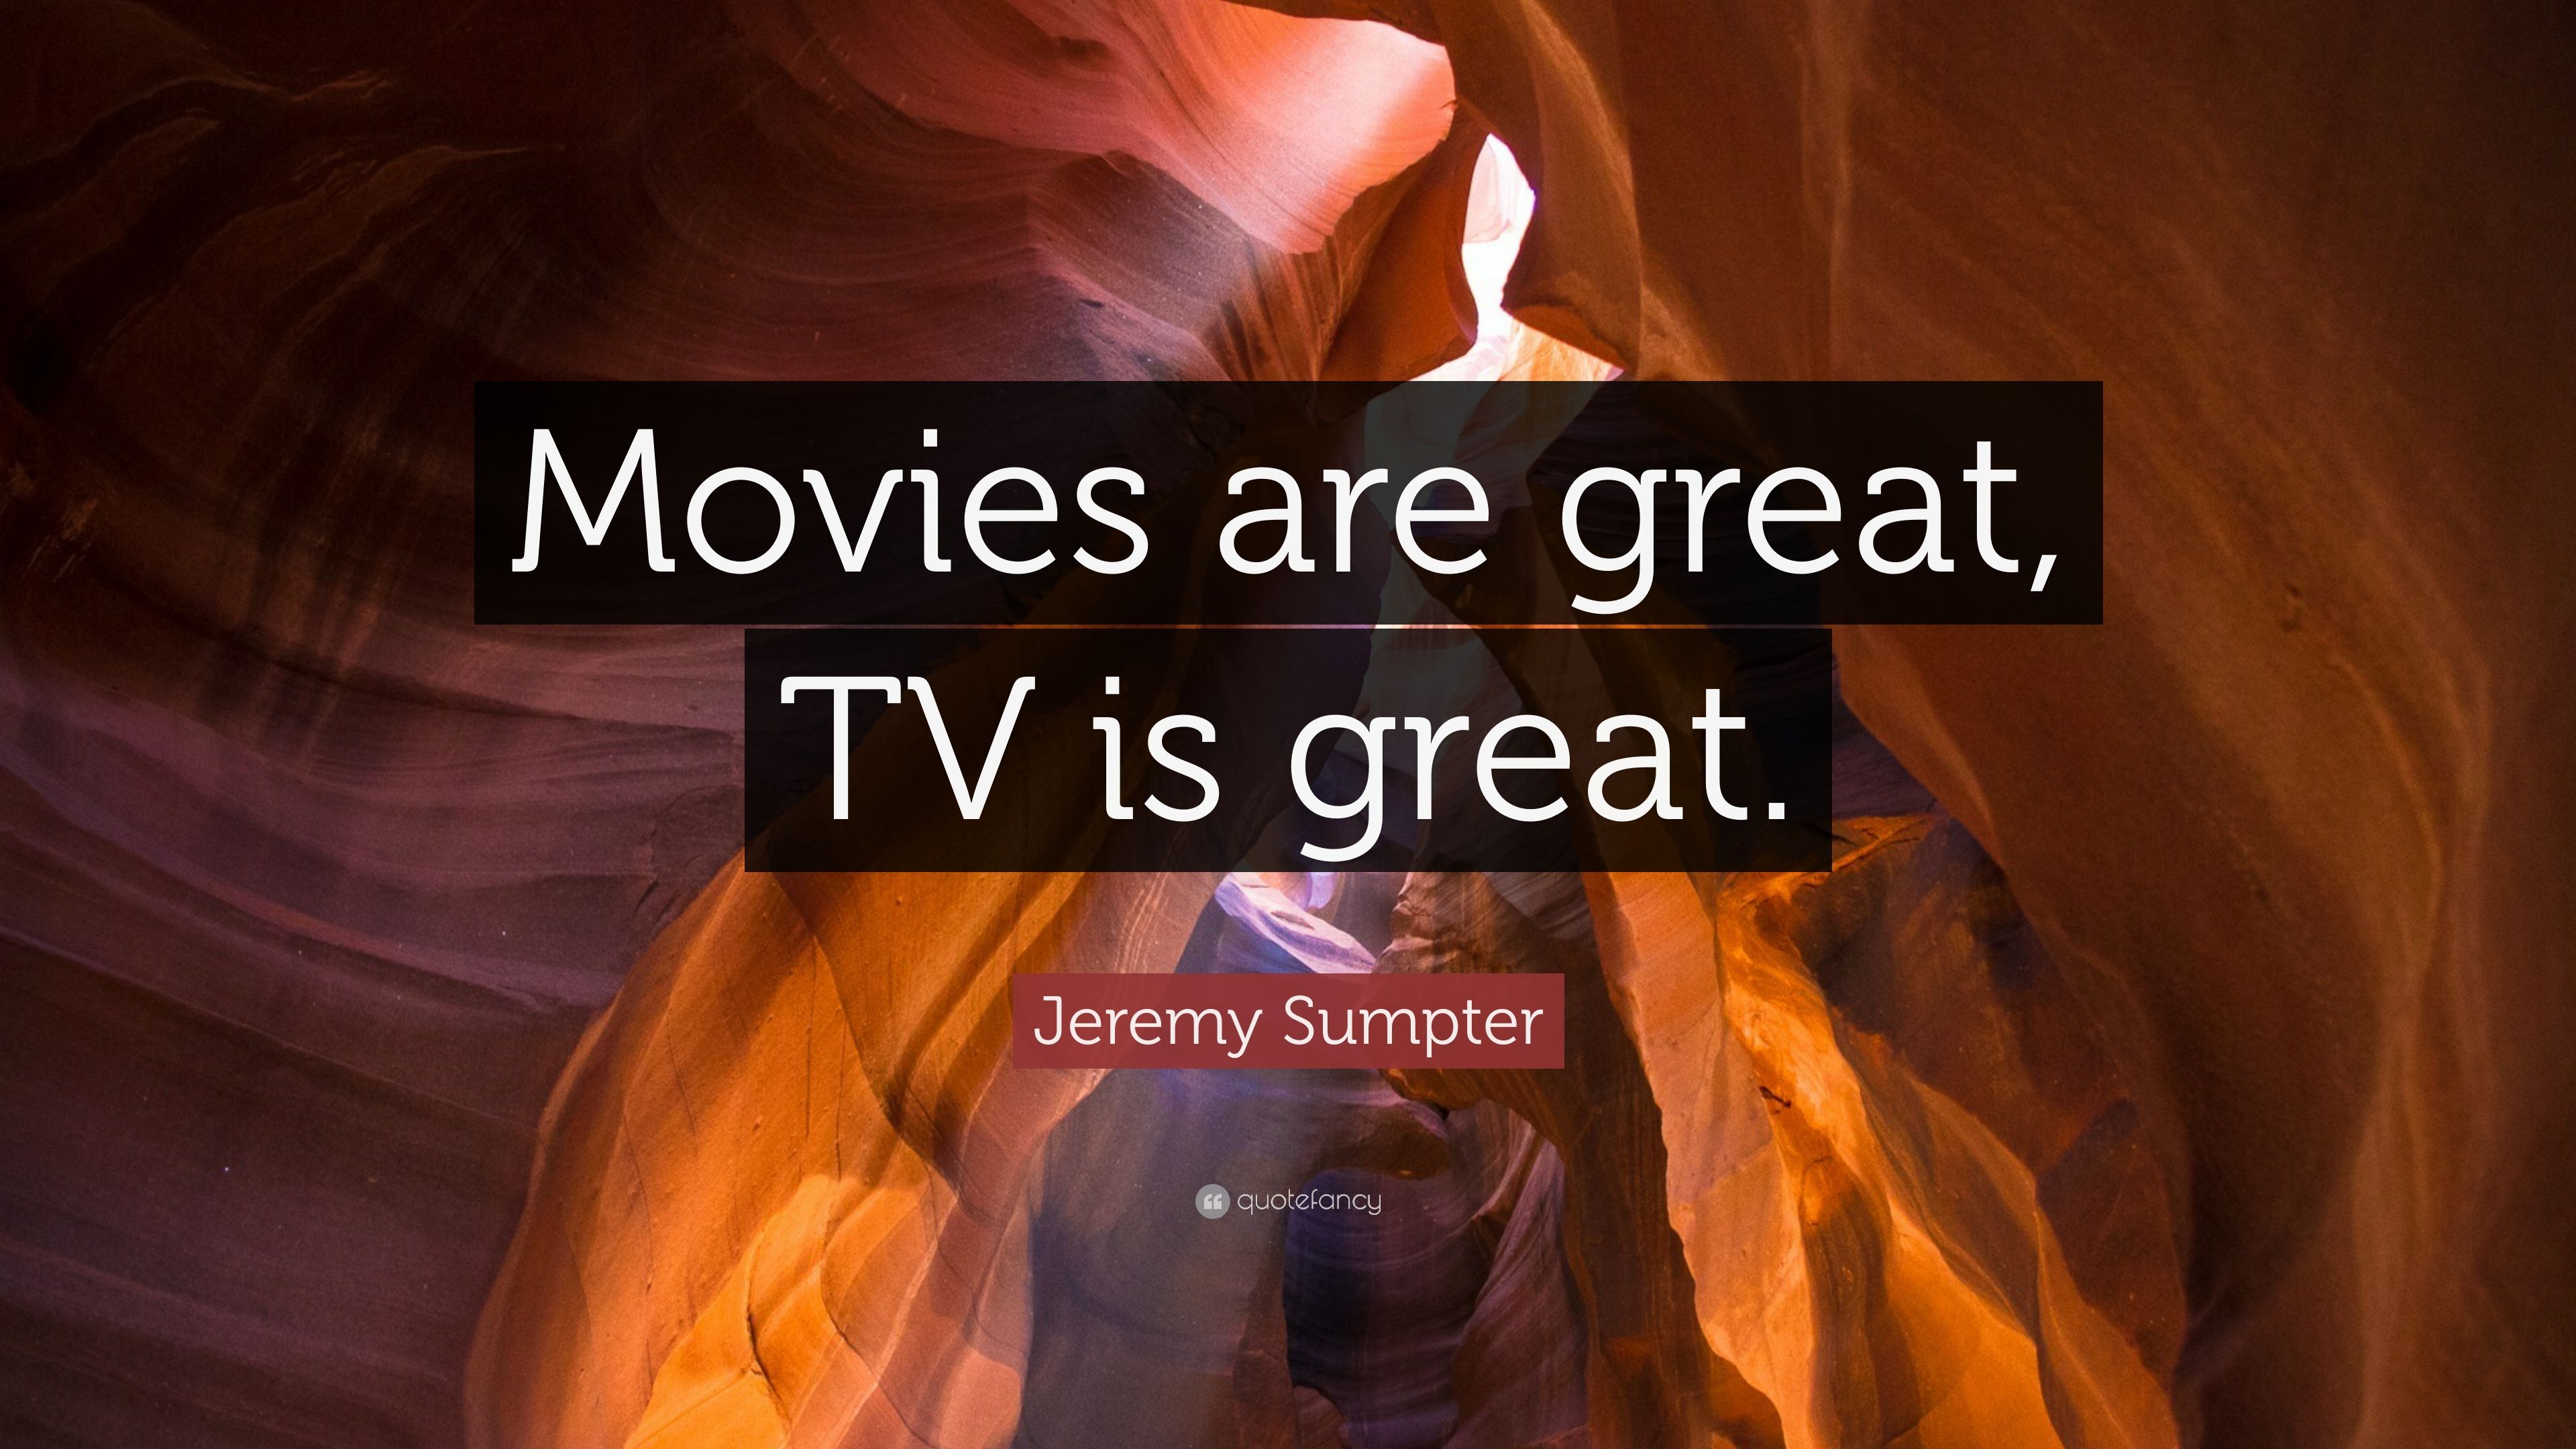 Jeremy Sumpter Quote: “Movies are great, TV is great.” 7